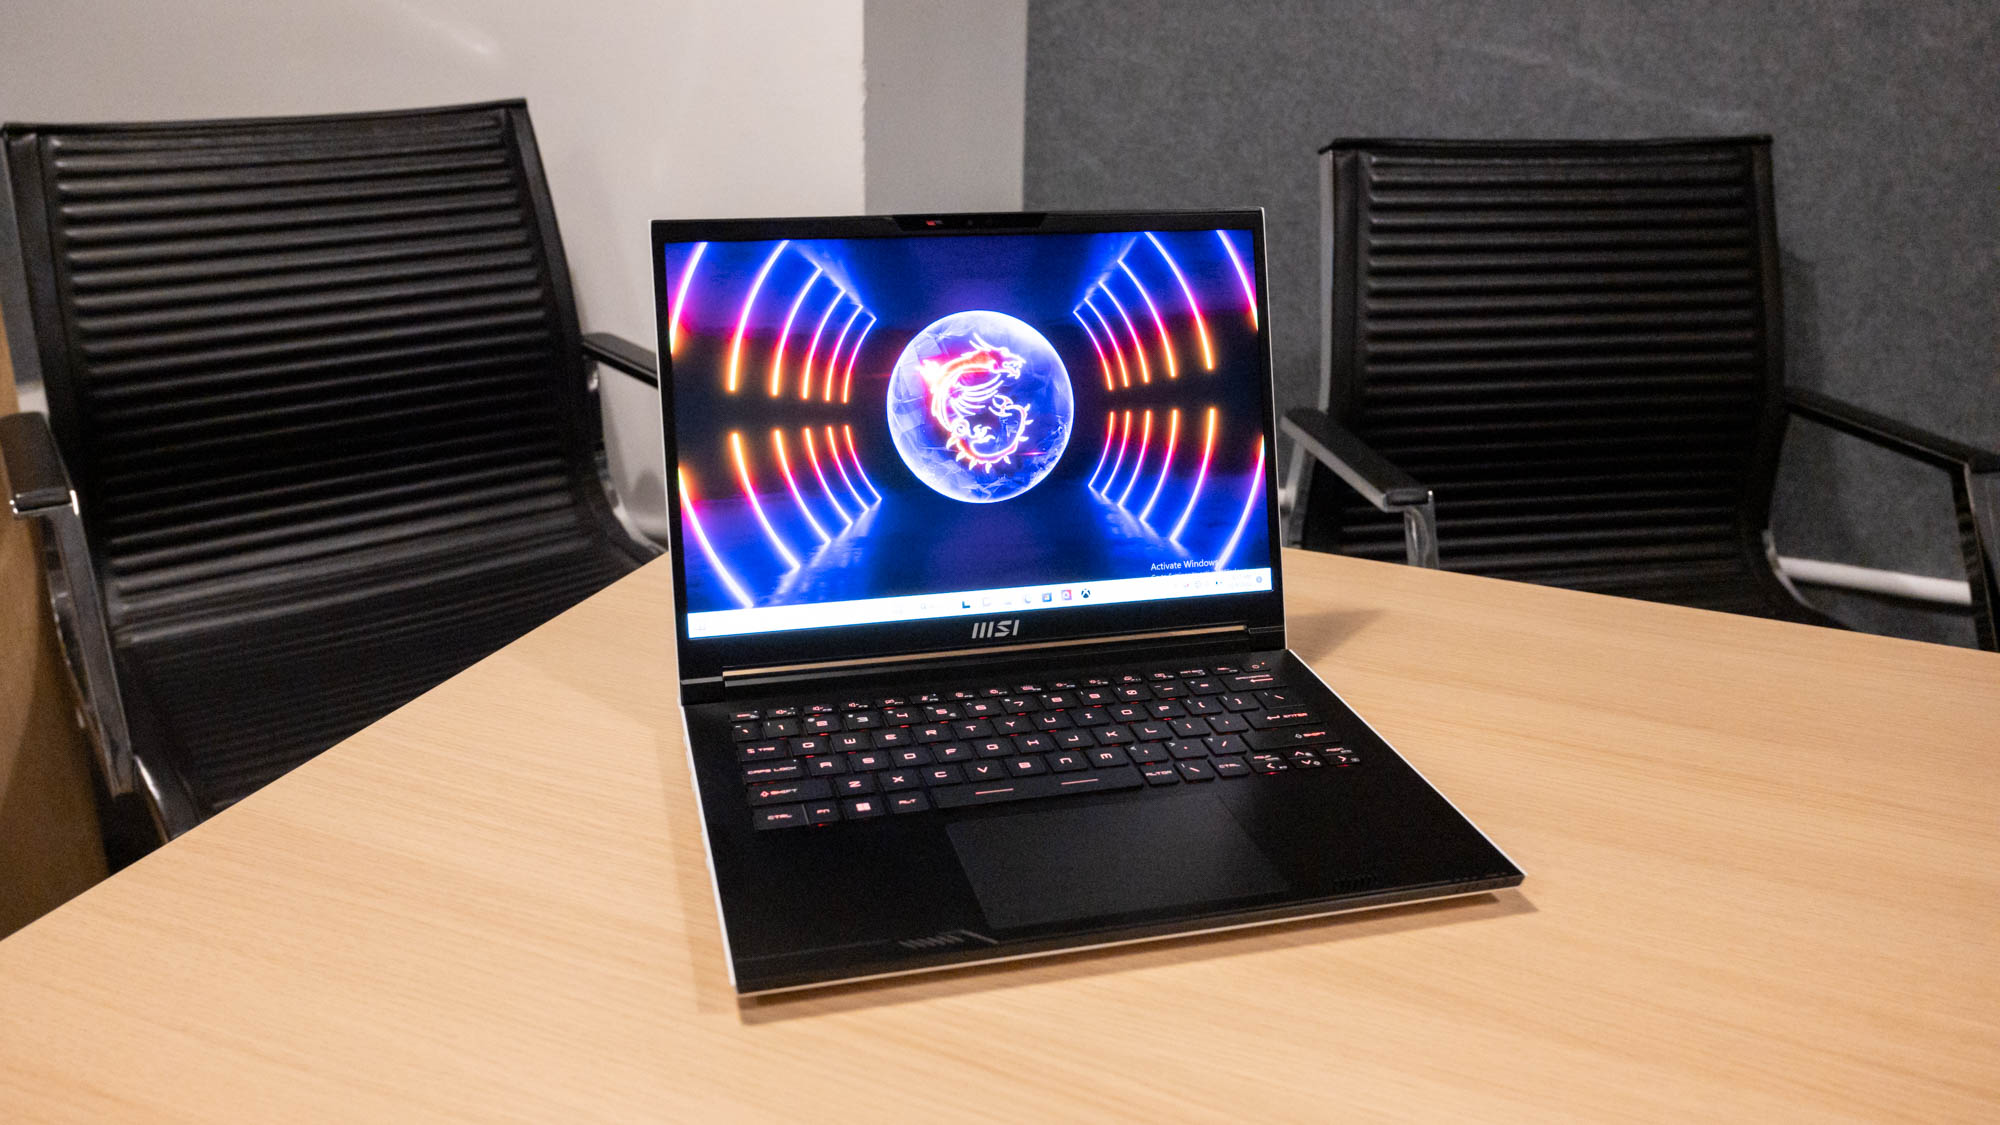 Lenovo reveals wonderfully affordable LOQ gaming laptops at CES